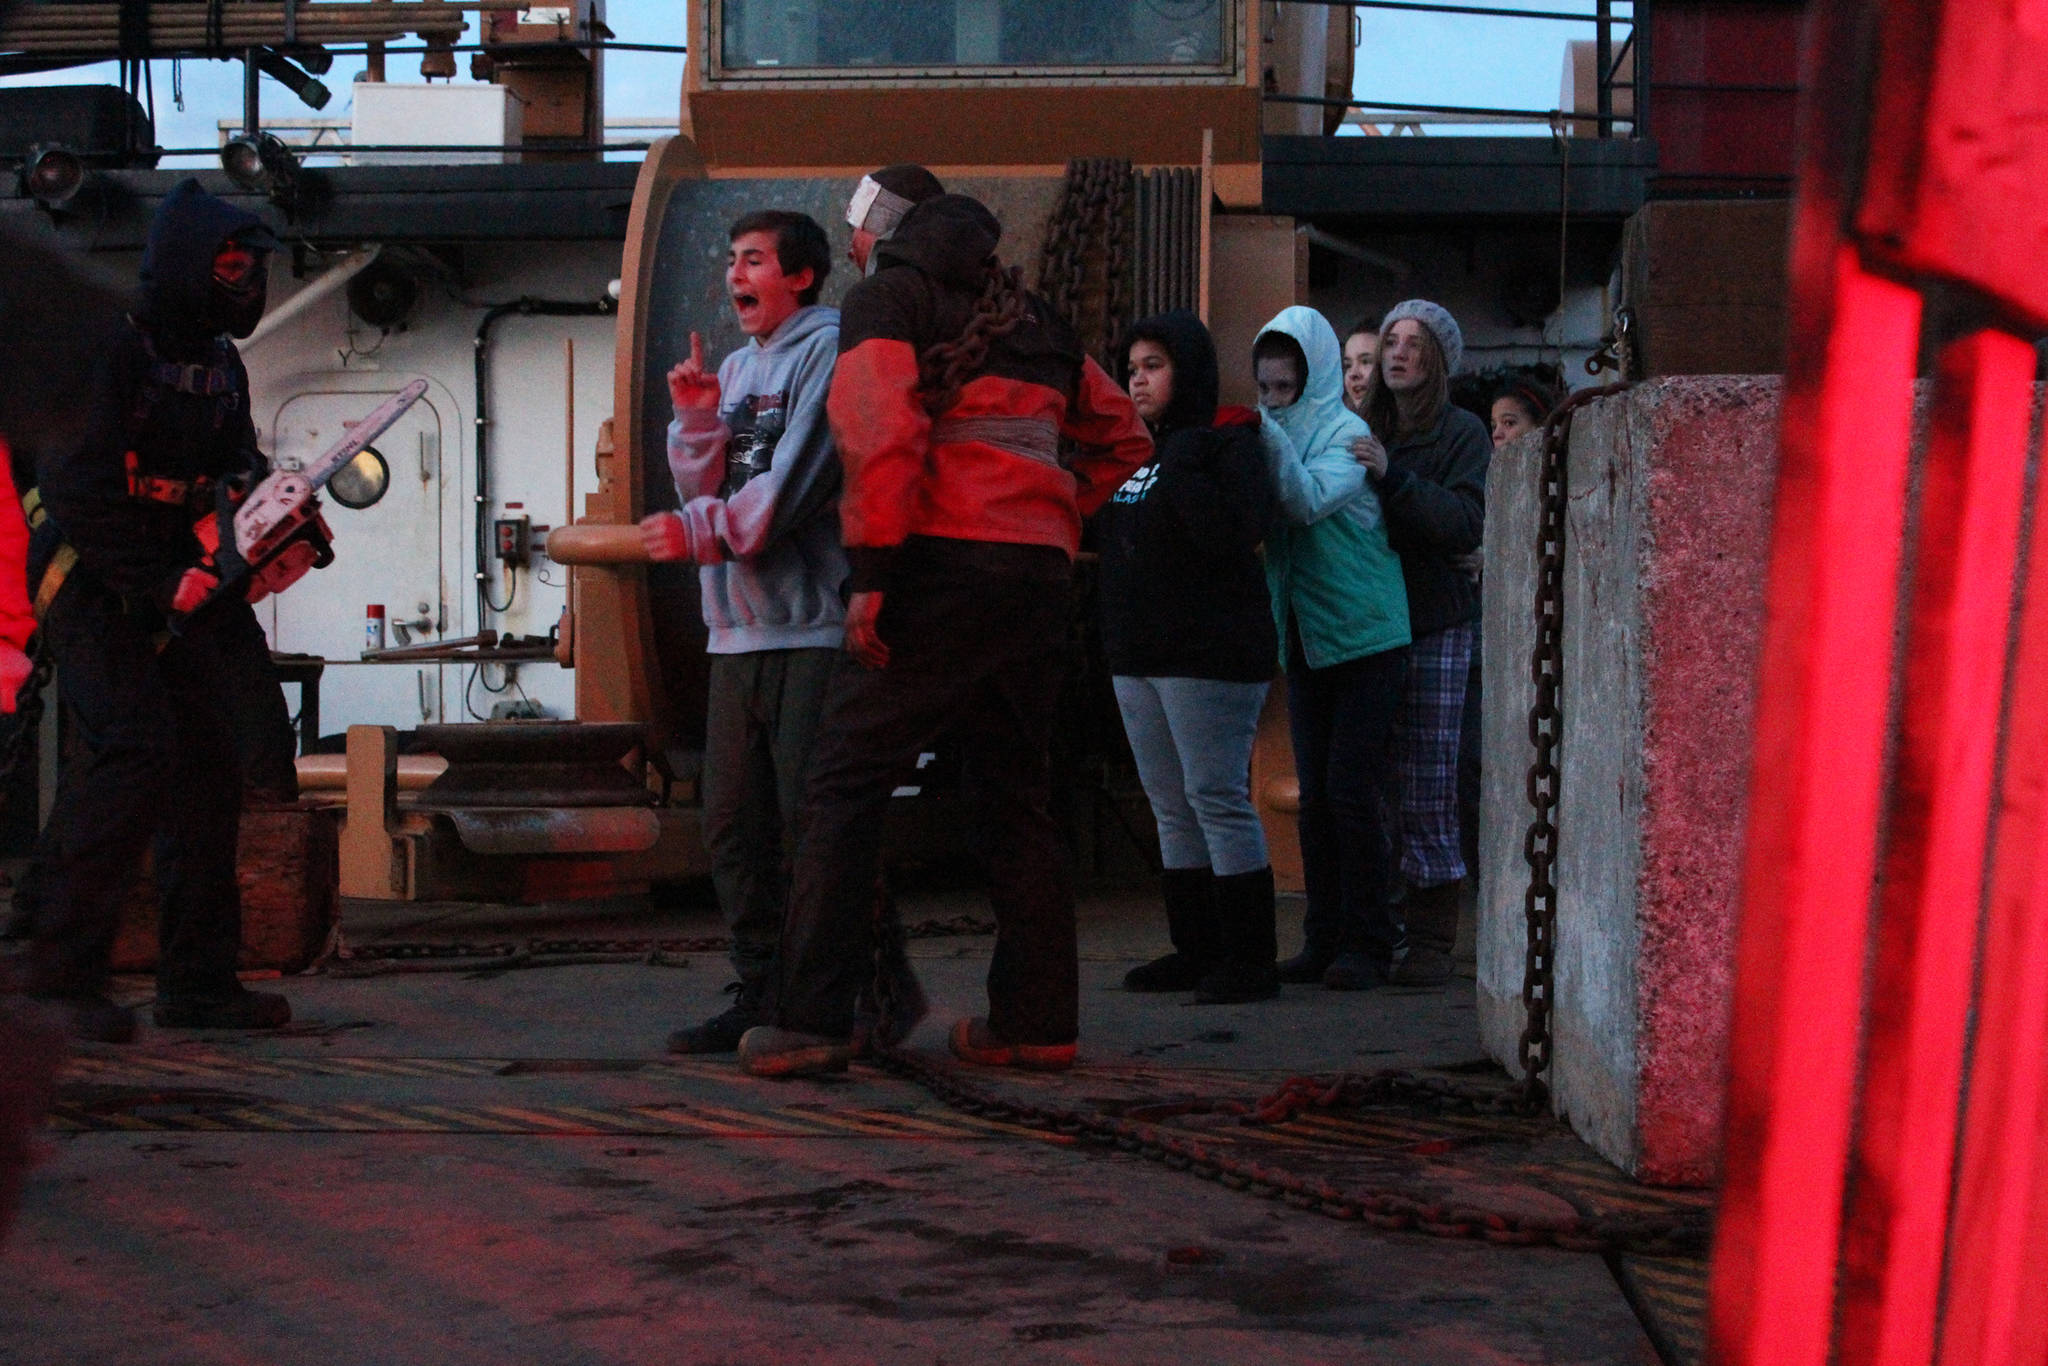 Ben Bergeron scares a group of youngsters passing through the deck of the U.S. Coast Guard Cutter Hickory during this year’s Haunted Hickory event Thursday, Oct. 26, 2017 in Homer, Alaska. Hundreds of residents young and old line up to have the living daylights scared out of them by the Hickory crew and their families, who spend nearly two full days decking out the ship. (Photo by Megan Pacer/Homer News)